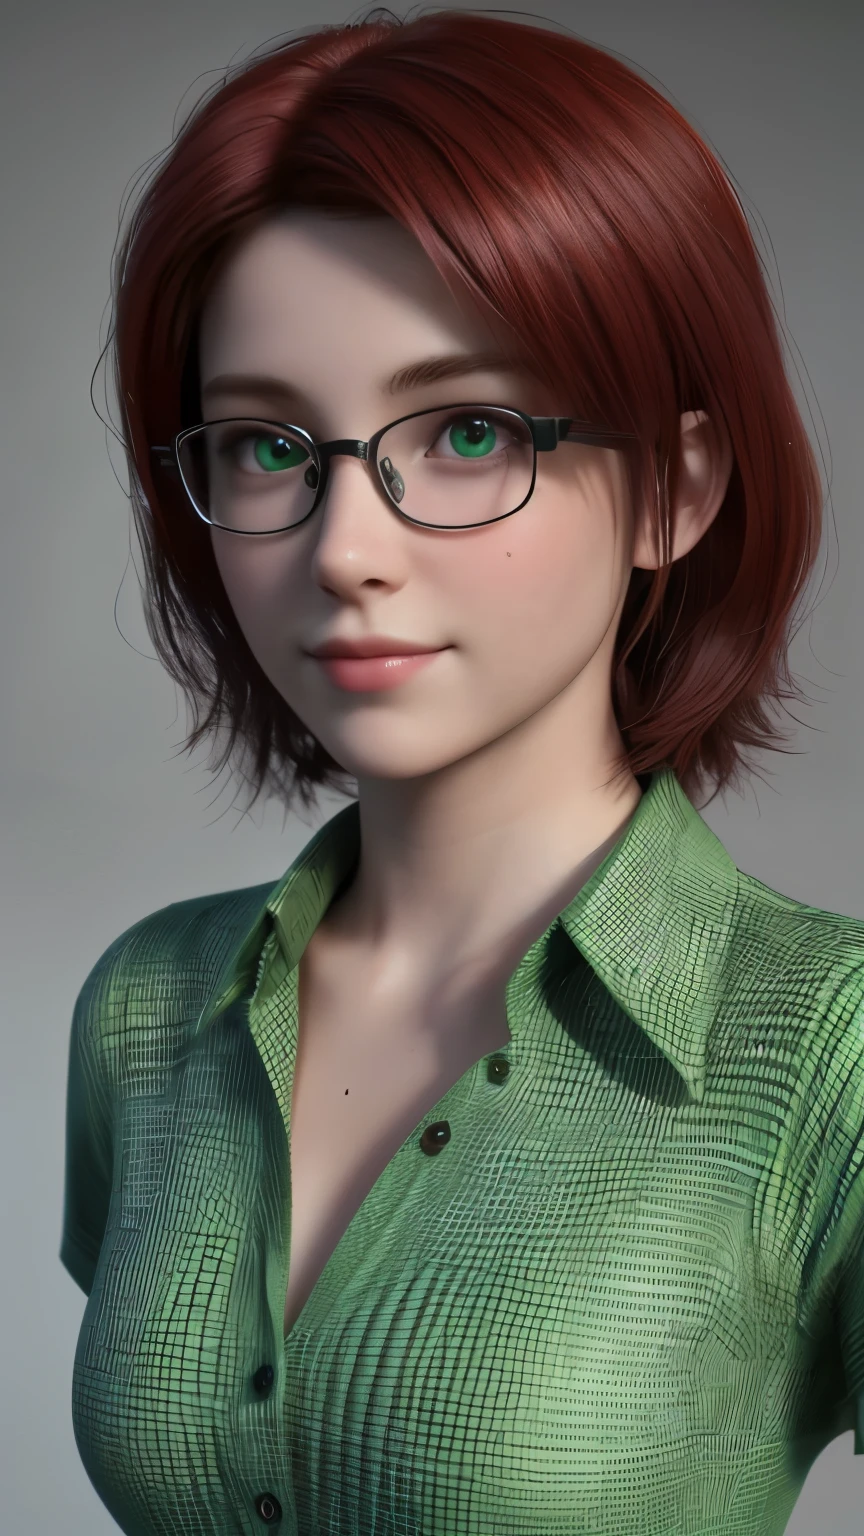 short, Red hair, green eyes, metal frame glasses, smile of a cute 15 year old girl in a green button up shirt dress, bare chest.. ((elegance. photorealism. Unreal engine. 3d model. Ultra high quality textures. High detail. 8k resolution))